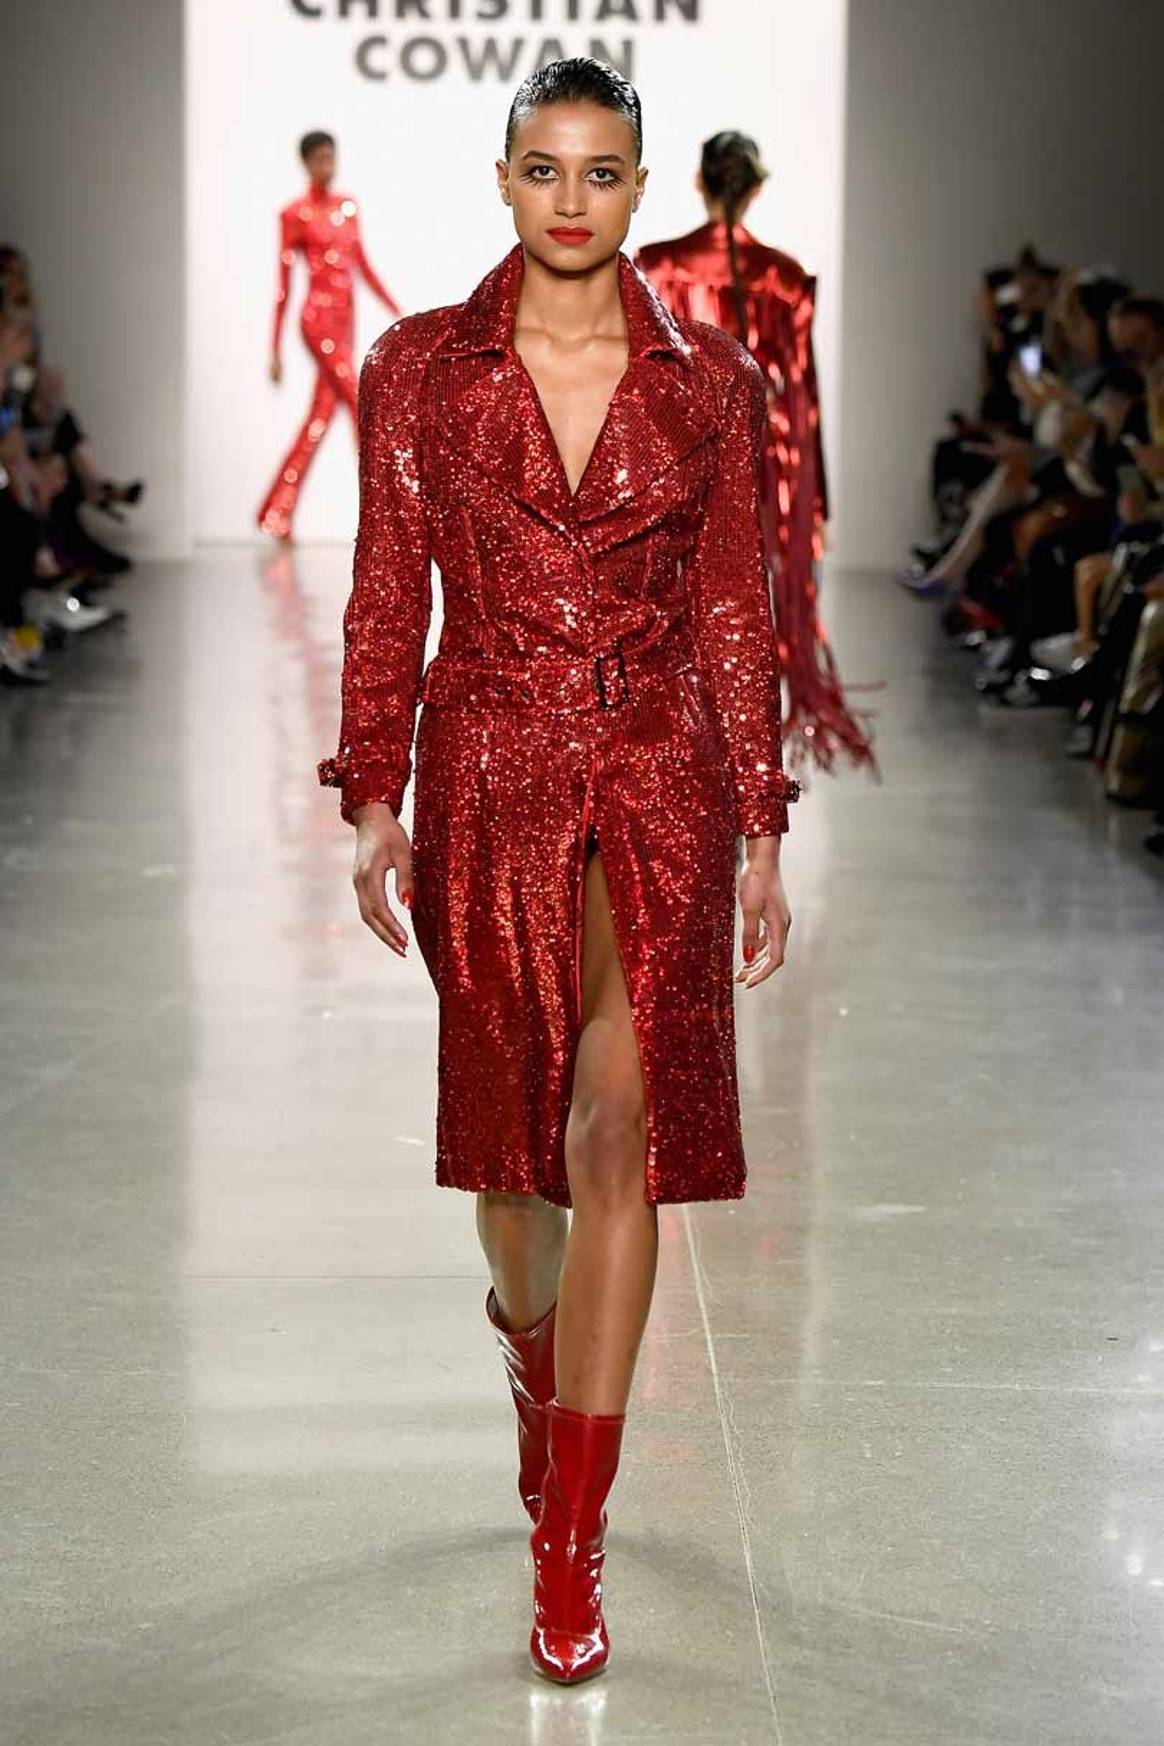 Christian Cowan goes for glitter and glamour for New York Fashion Week